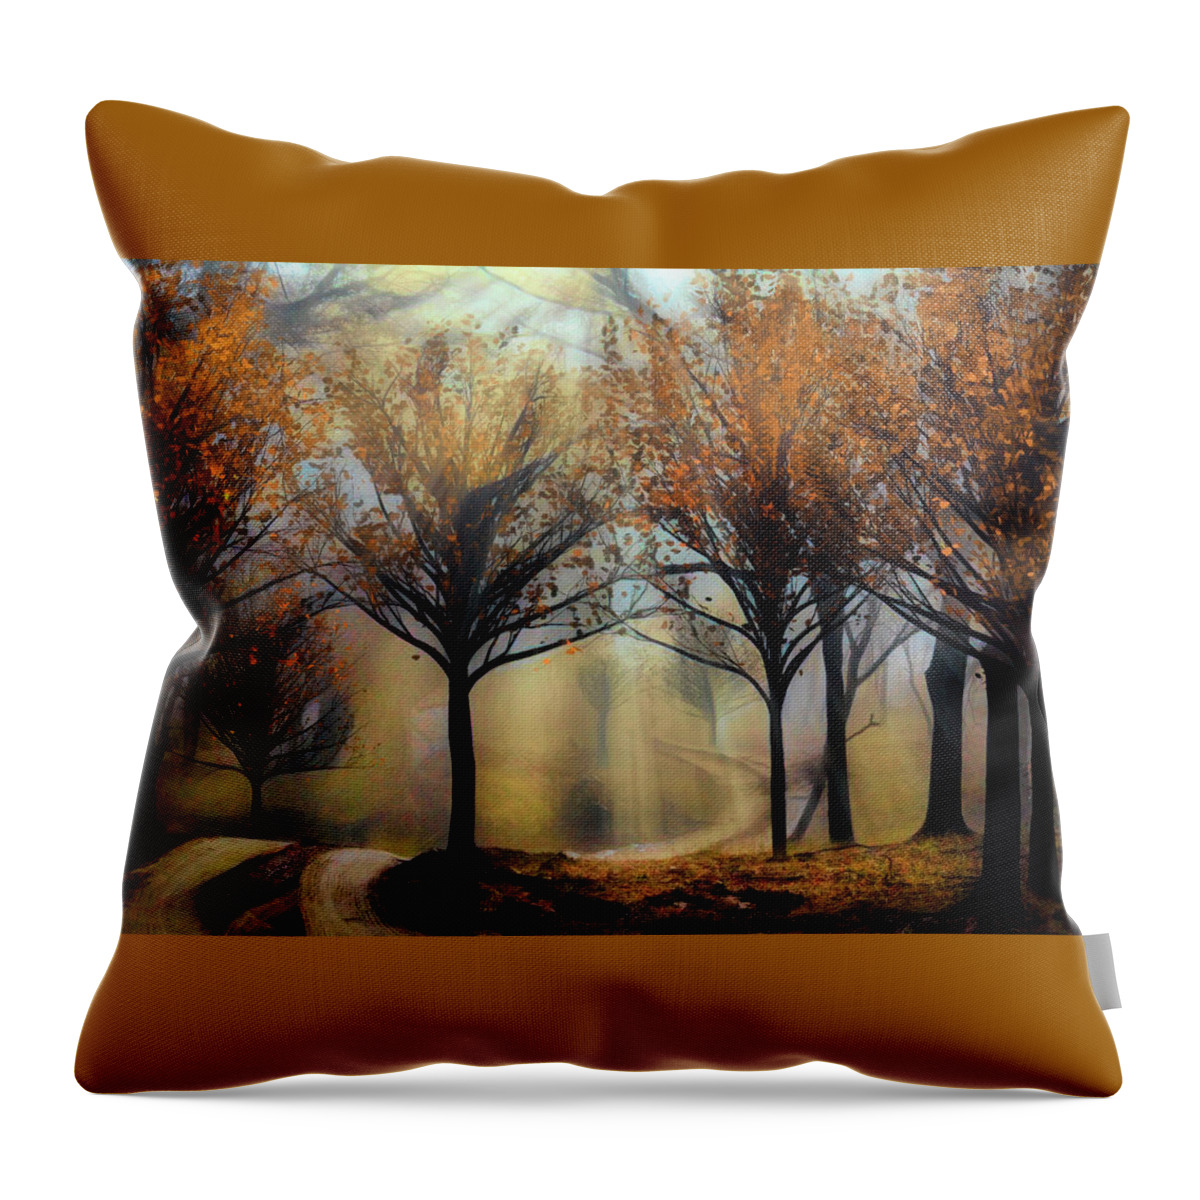 Clouds Throw Pillow featuring the digital art Meandering Through the Forest at Dawn Abstract Painting by Debra and Dave Vanderlaan